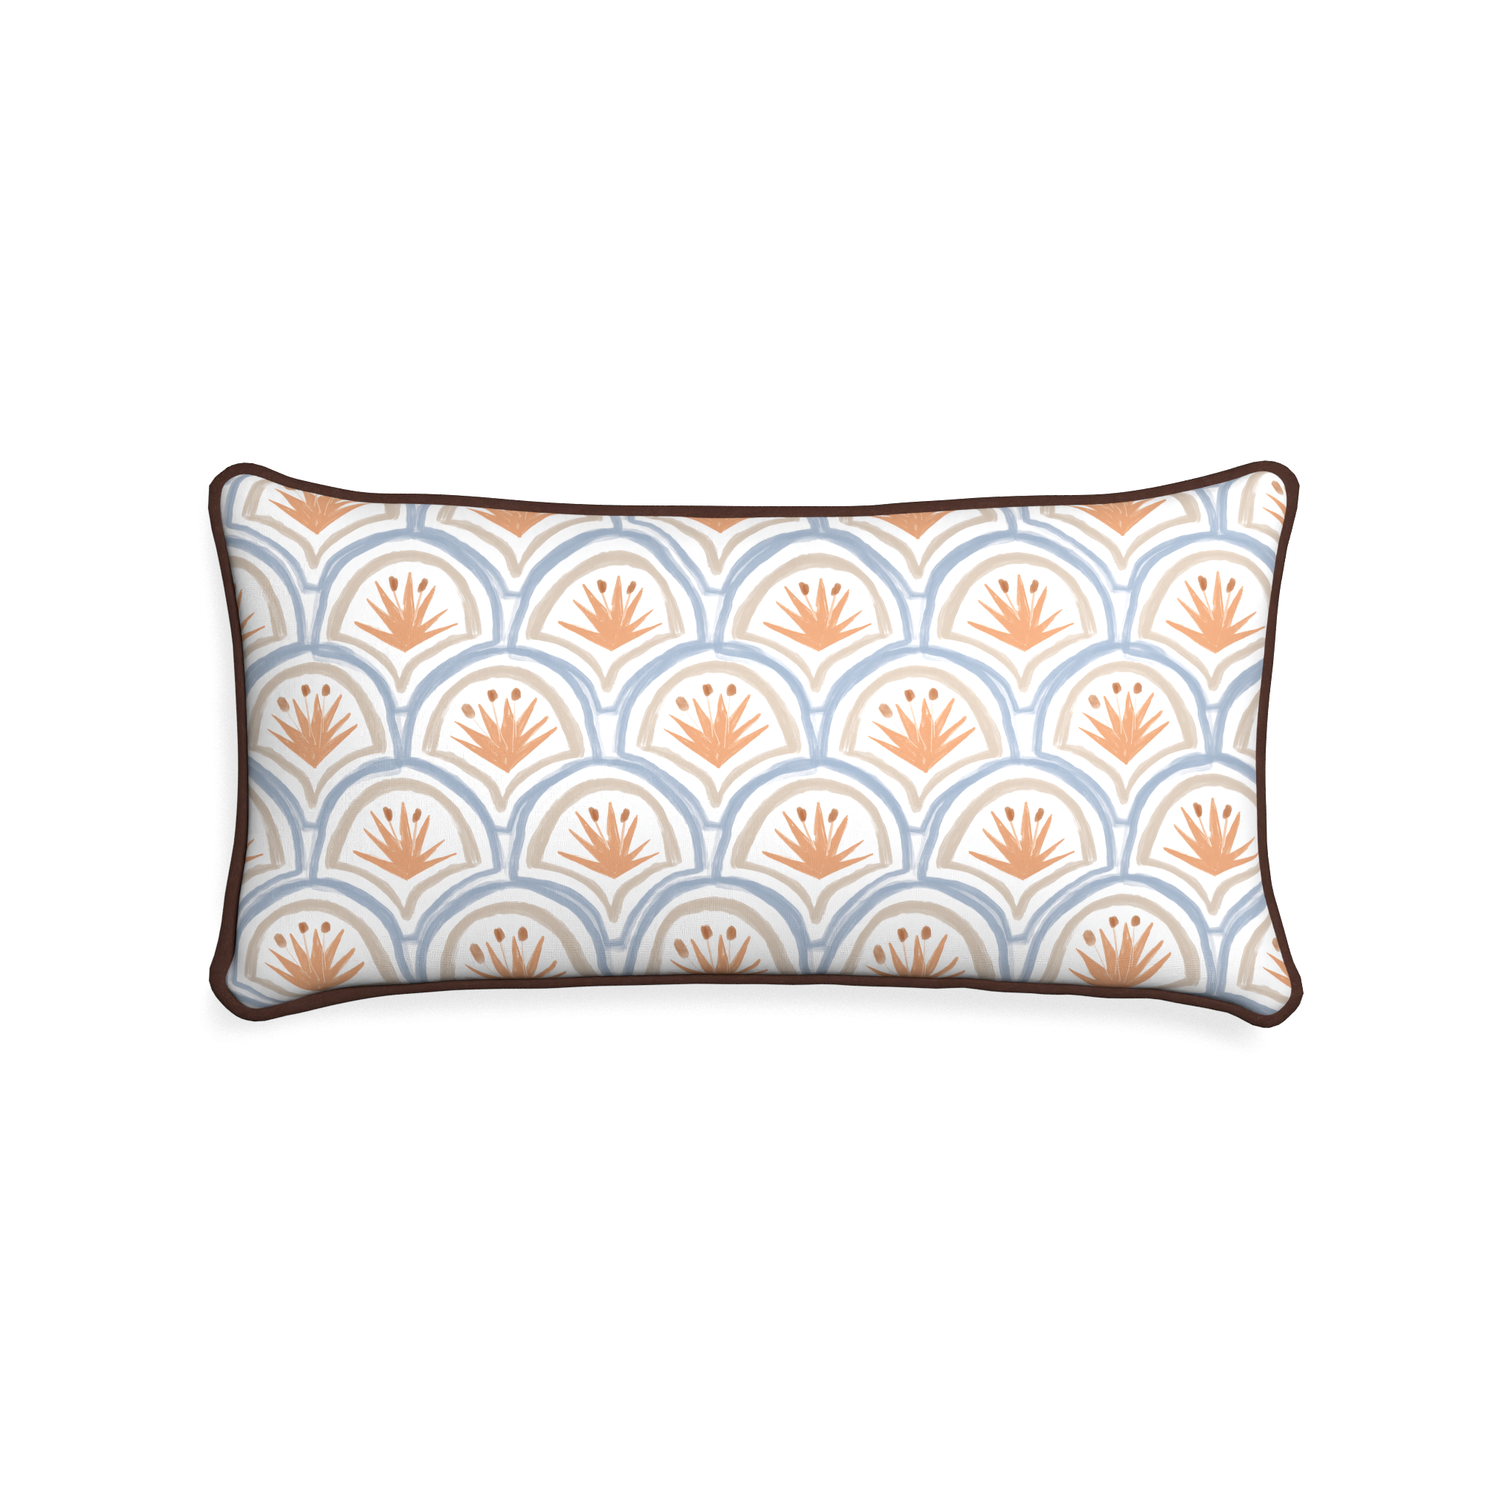 Midi-lumbar thatcher apricot custom art deco palm patternpillow with w piping on white background